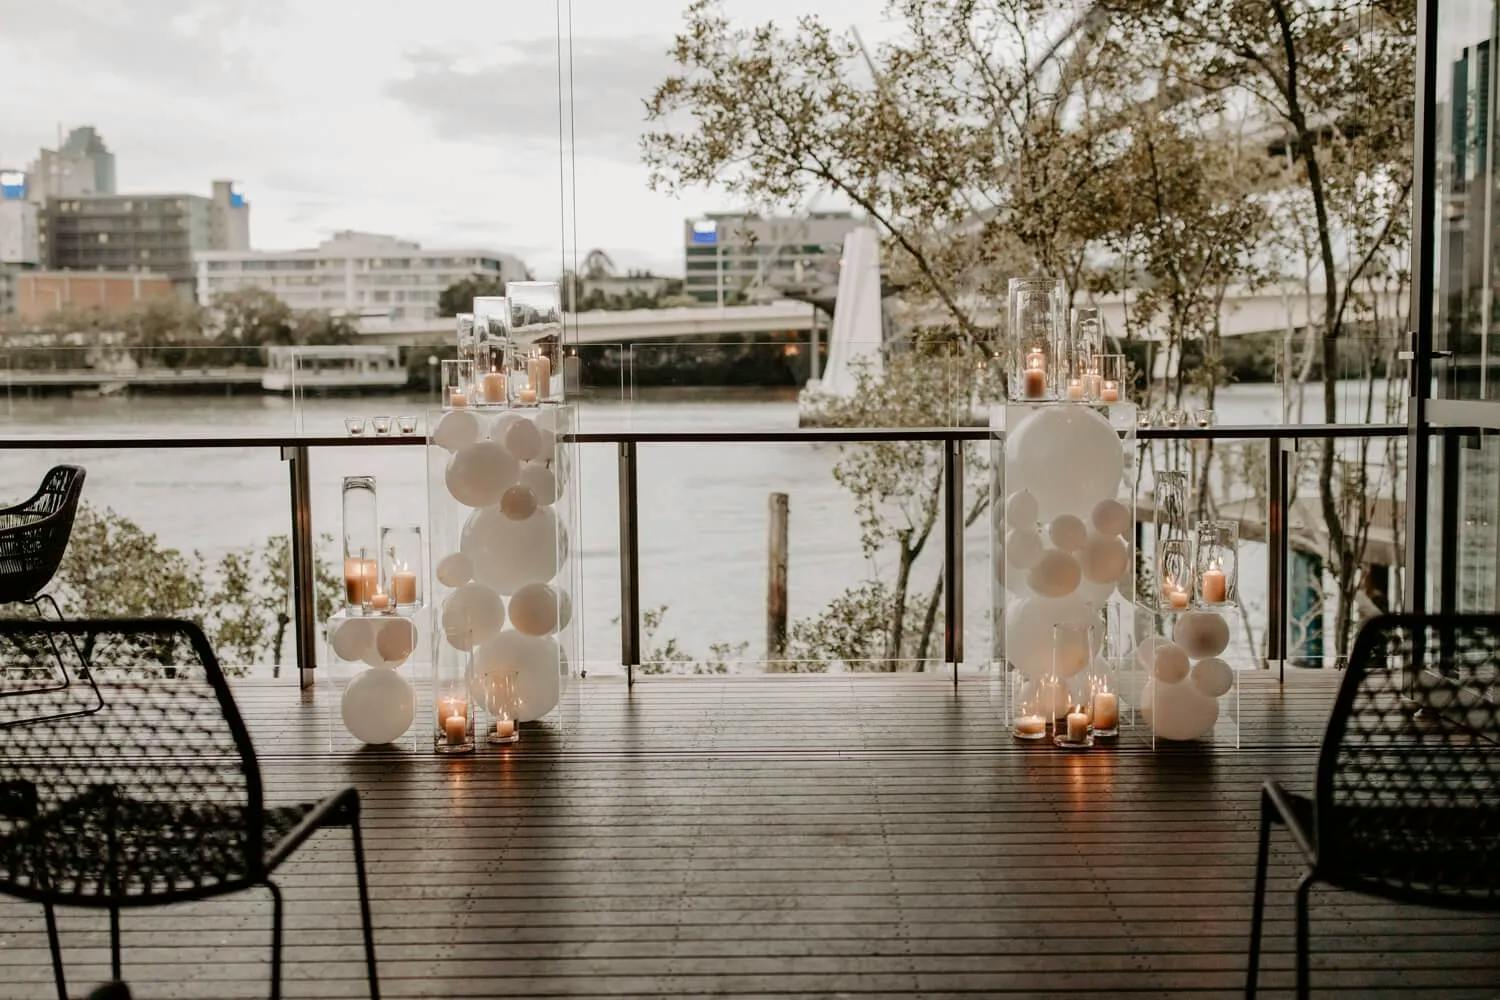 A serene riverside setting features a wooden deck adorned with white balloon columns and numerous candles. Clear glass vases brimming with candles line the deck. Modern black wicker chairs are neatly arranged, while city buildings and leafless trees frame the background.